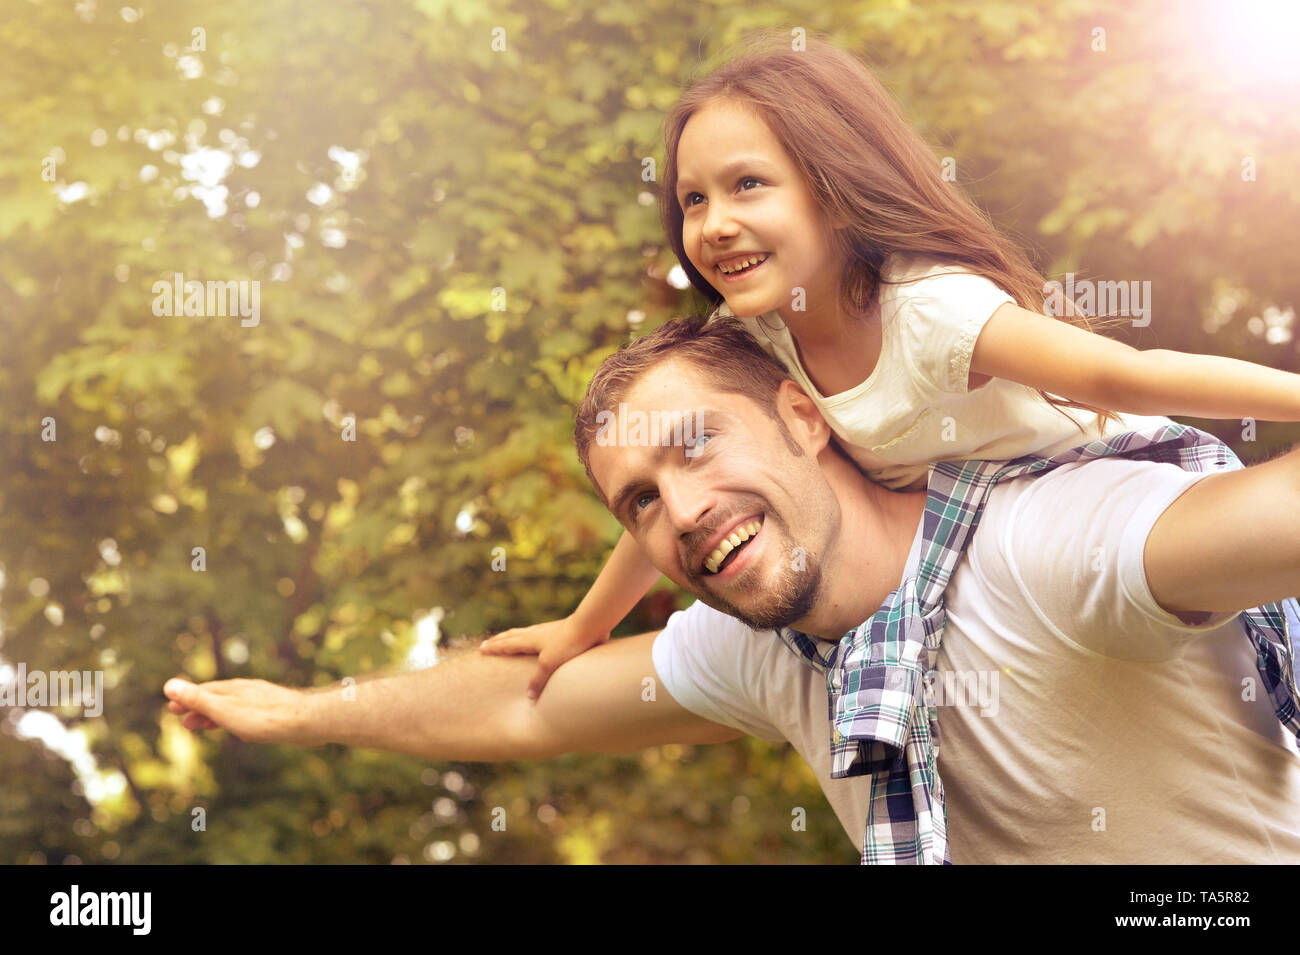 Portrait of father with daughter in summer park Stock Photo